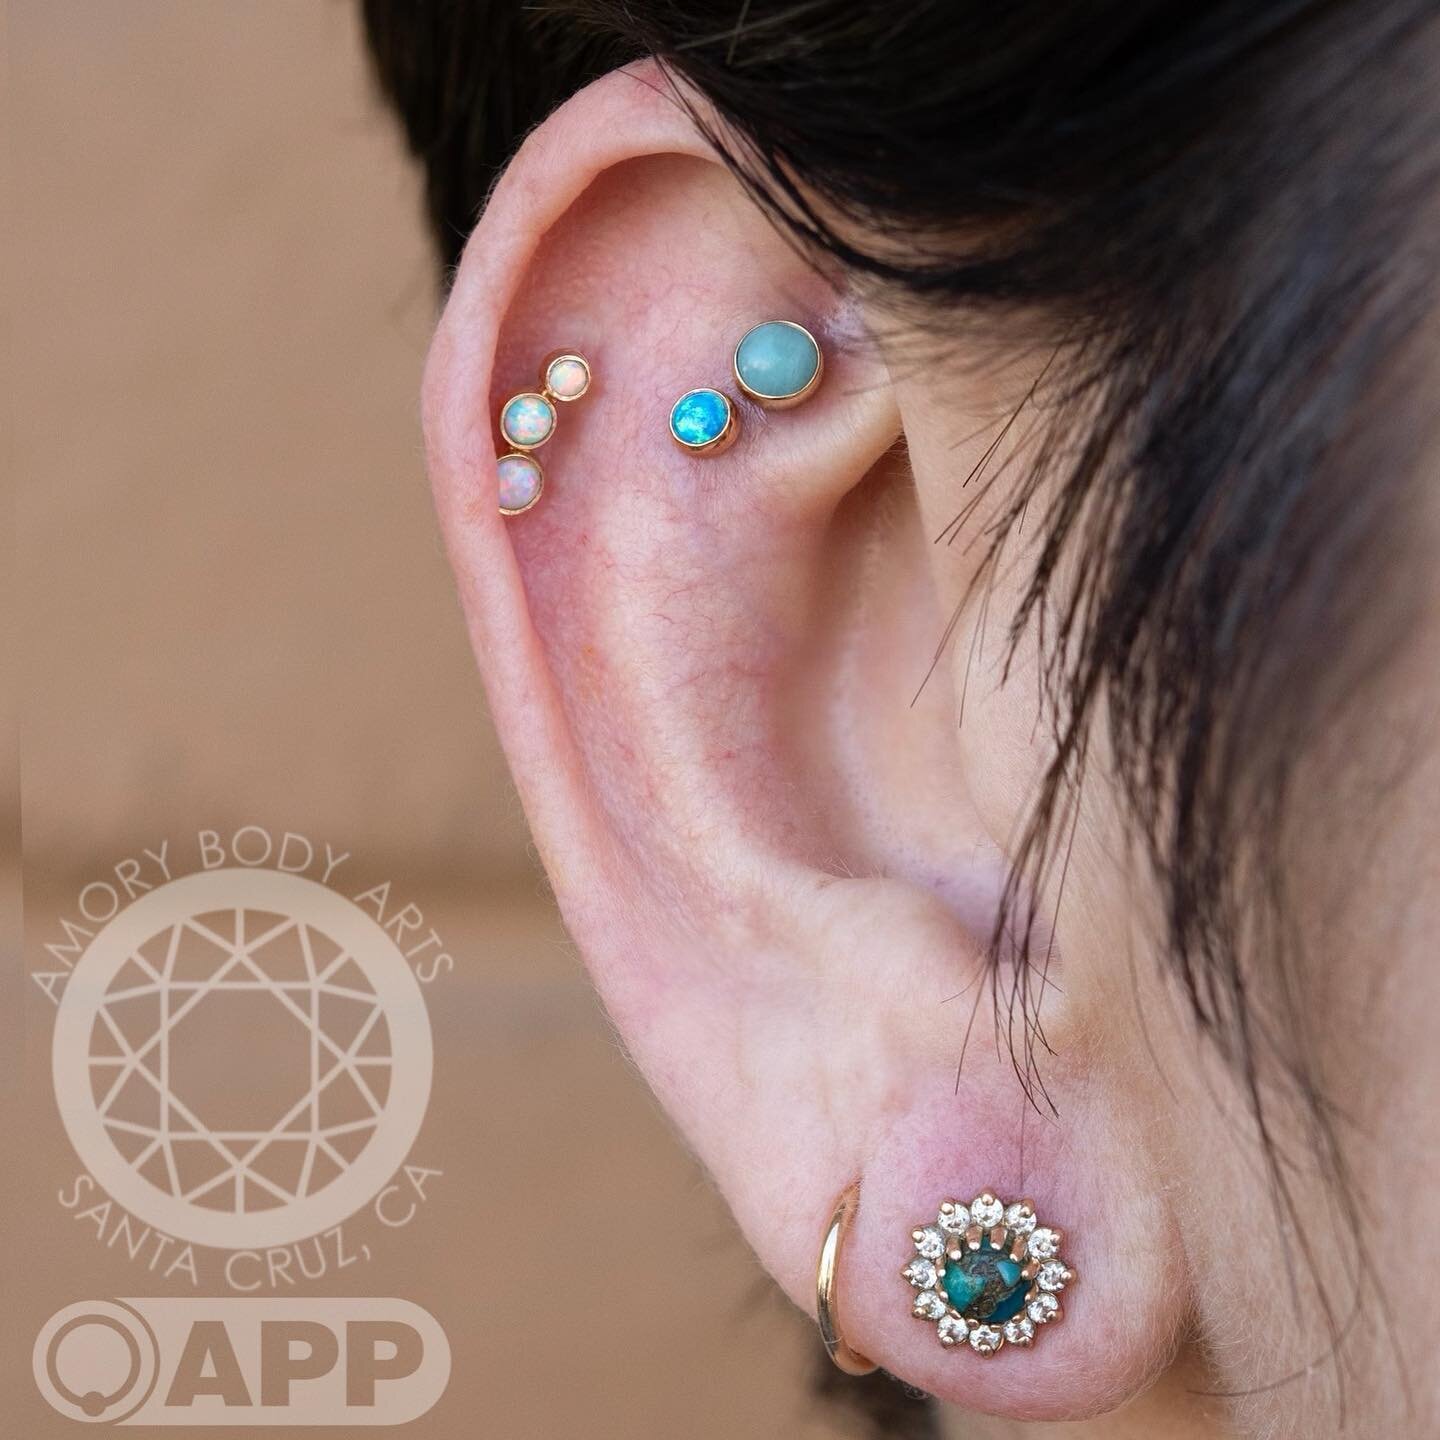 Peek at this collection of ear piercings from Adam and Dan!✨

We&rsquo;ve had the pleasure of working with Kari since our opening, slowly adding and sometimes removing piercings over the years. 

Dan had the pleasure of adding two new faux-rook pierc